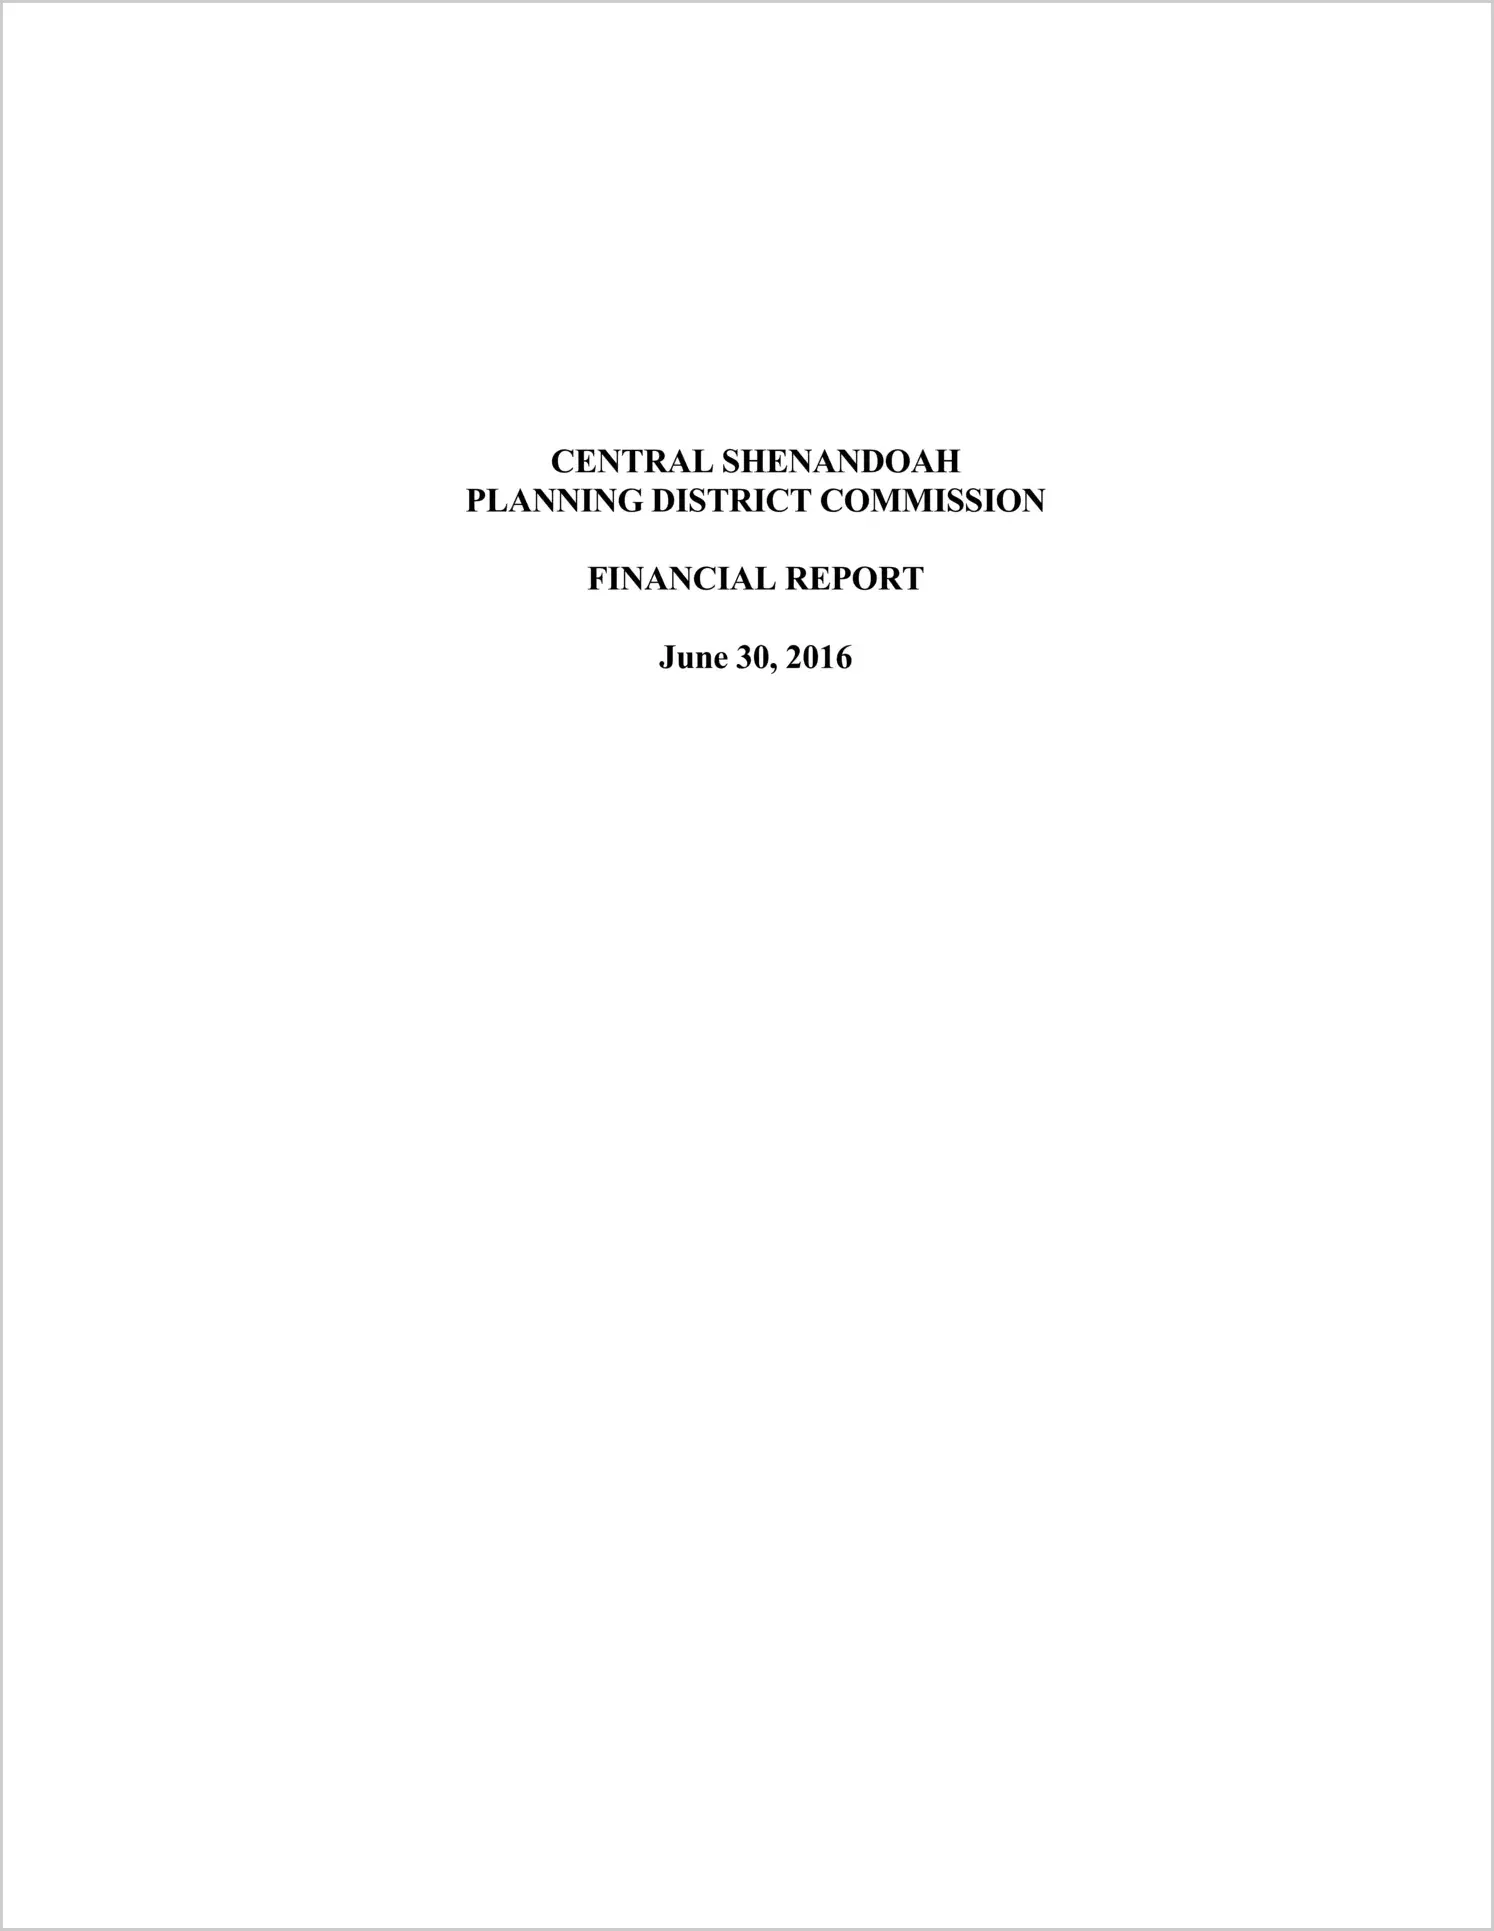 2016 ABC/Other Annual Financial Report  for Central Shenandoah Planning District Commission